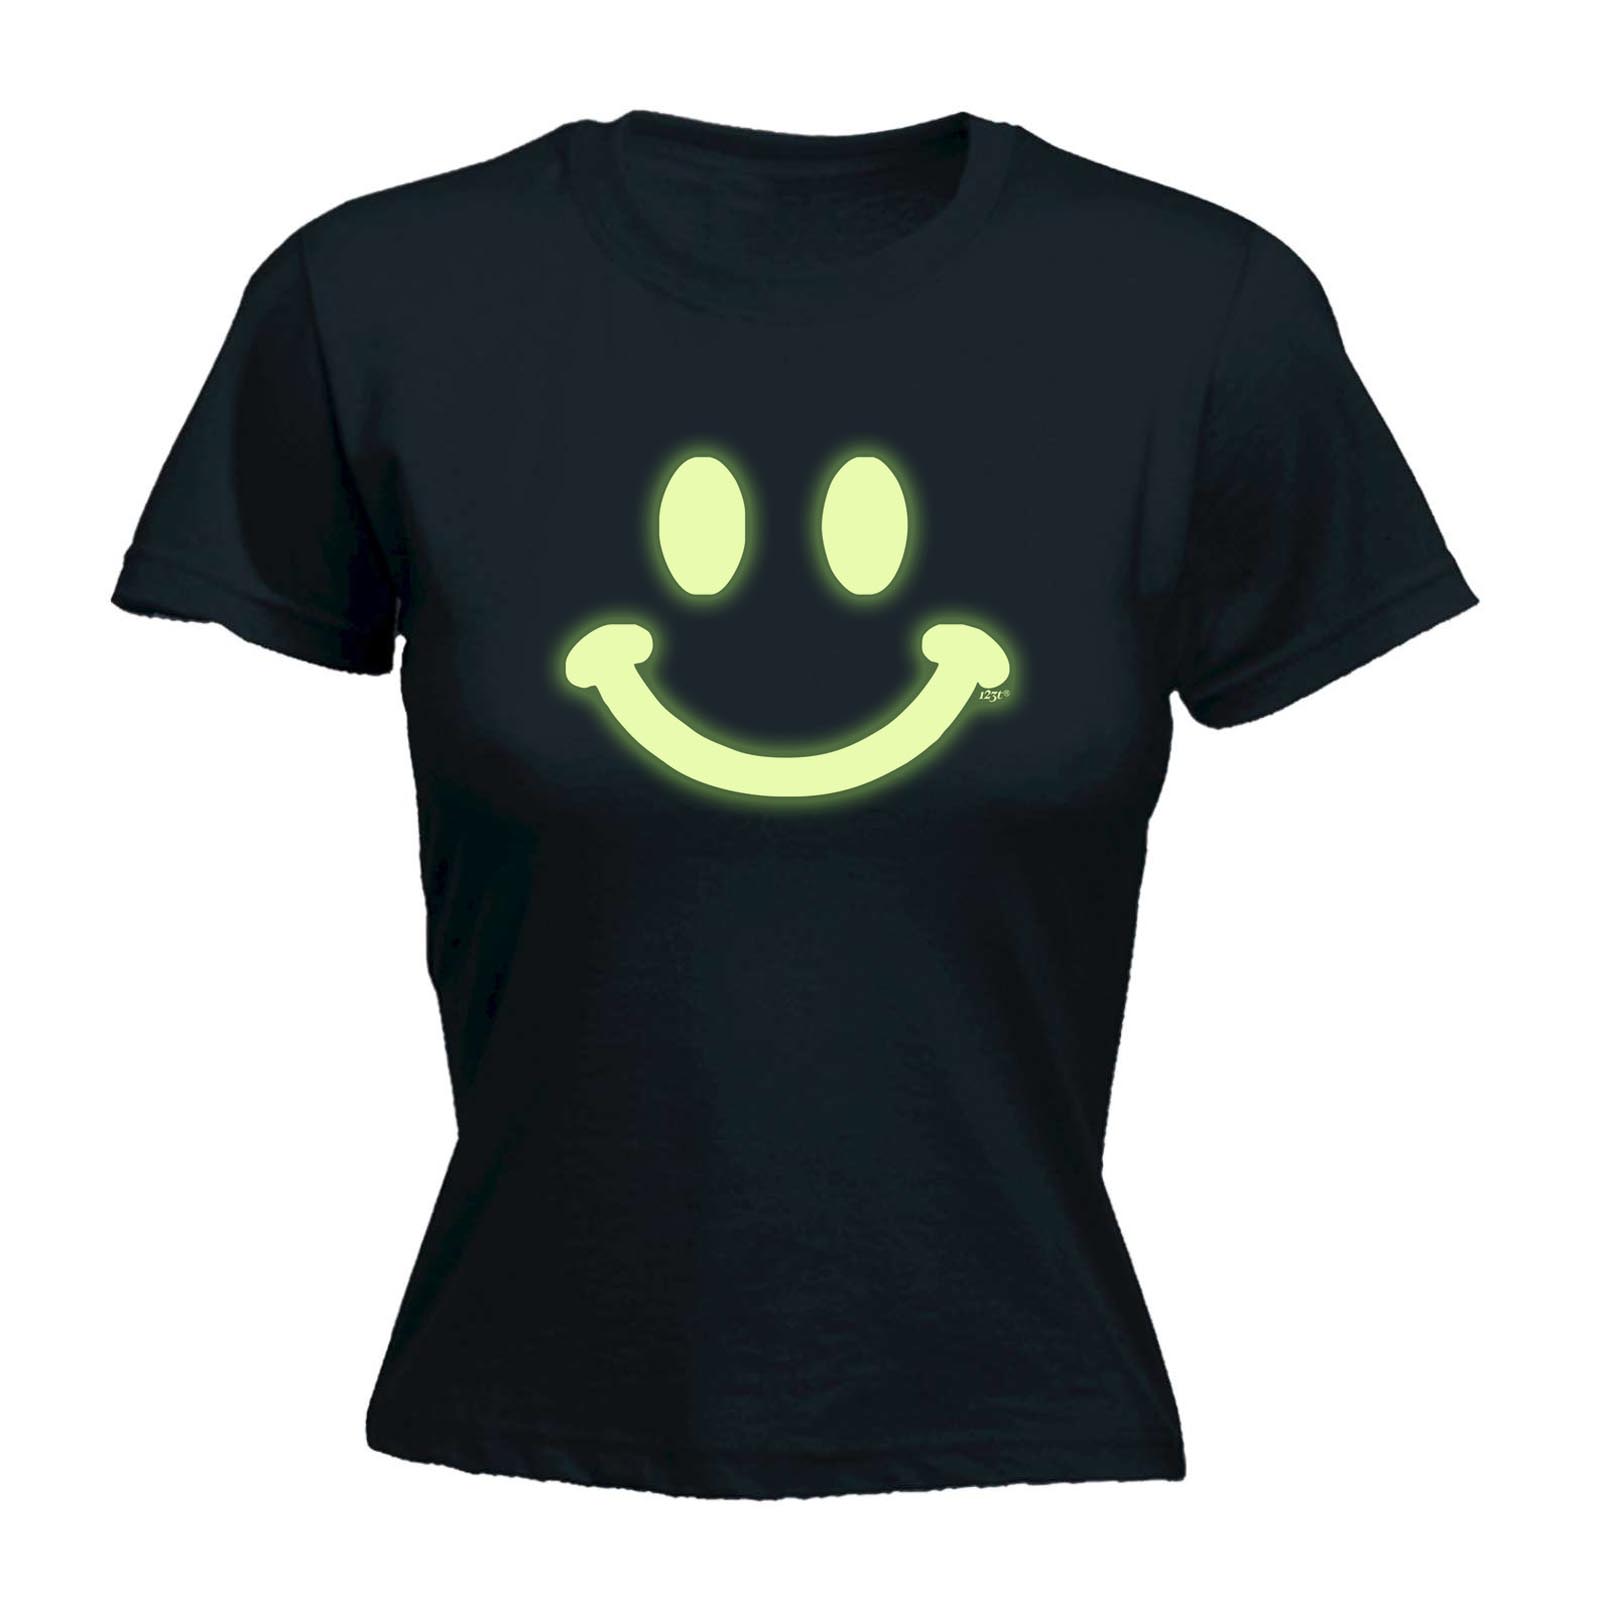 Funny Novelty Tops T-Shirt Womens tee TShirt Smile Face Glow In The Dark 